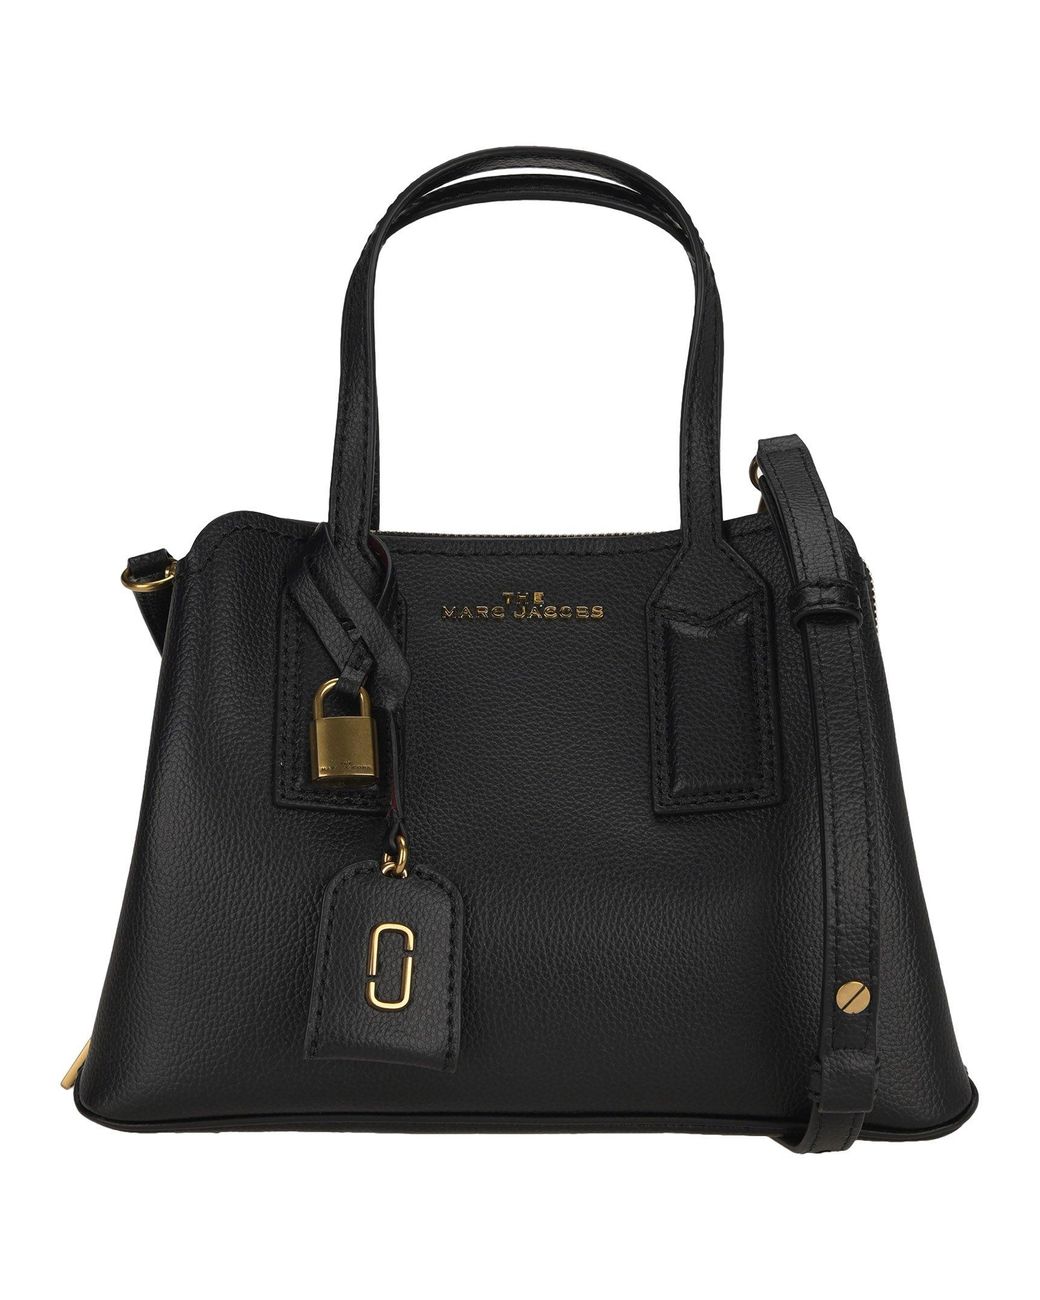 Marc Jacobs Leather The Editor Tote Bag in Black - Lyst